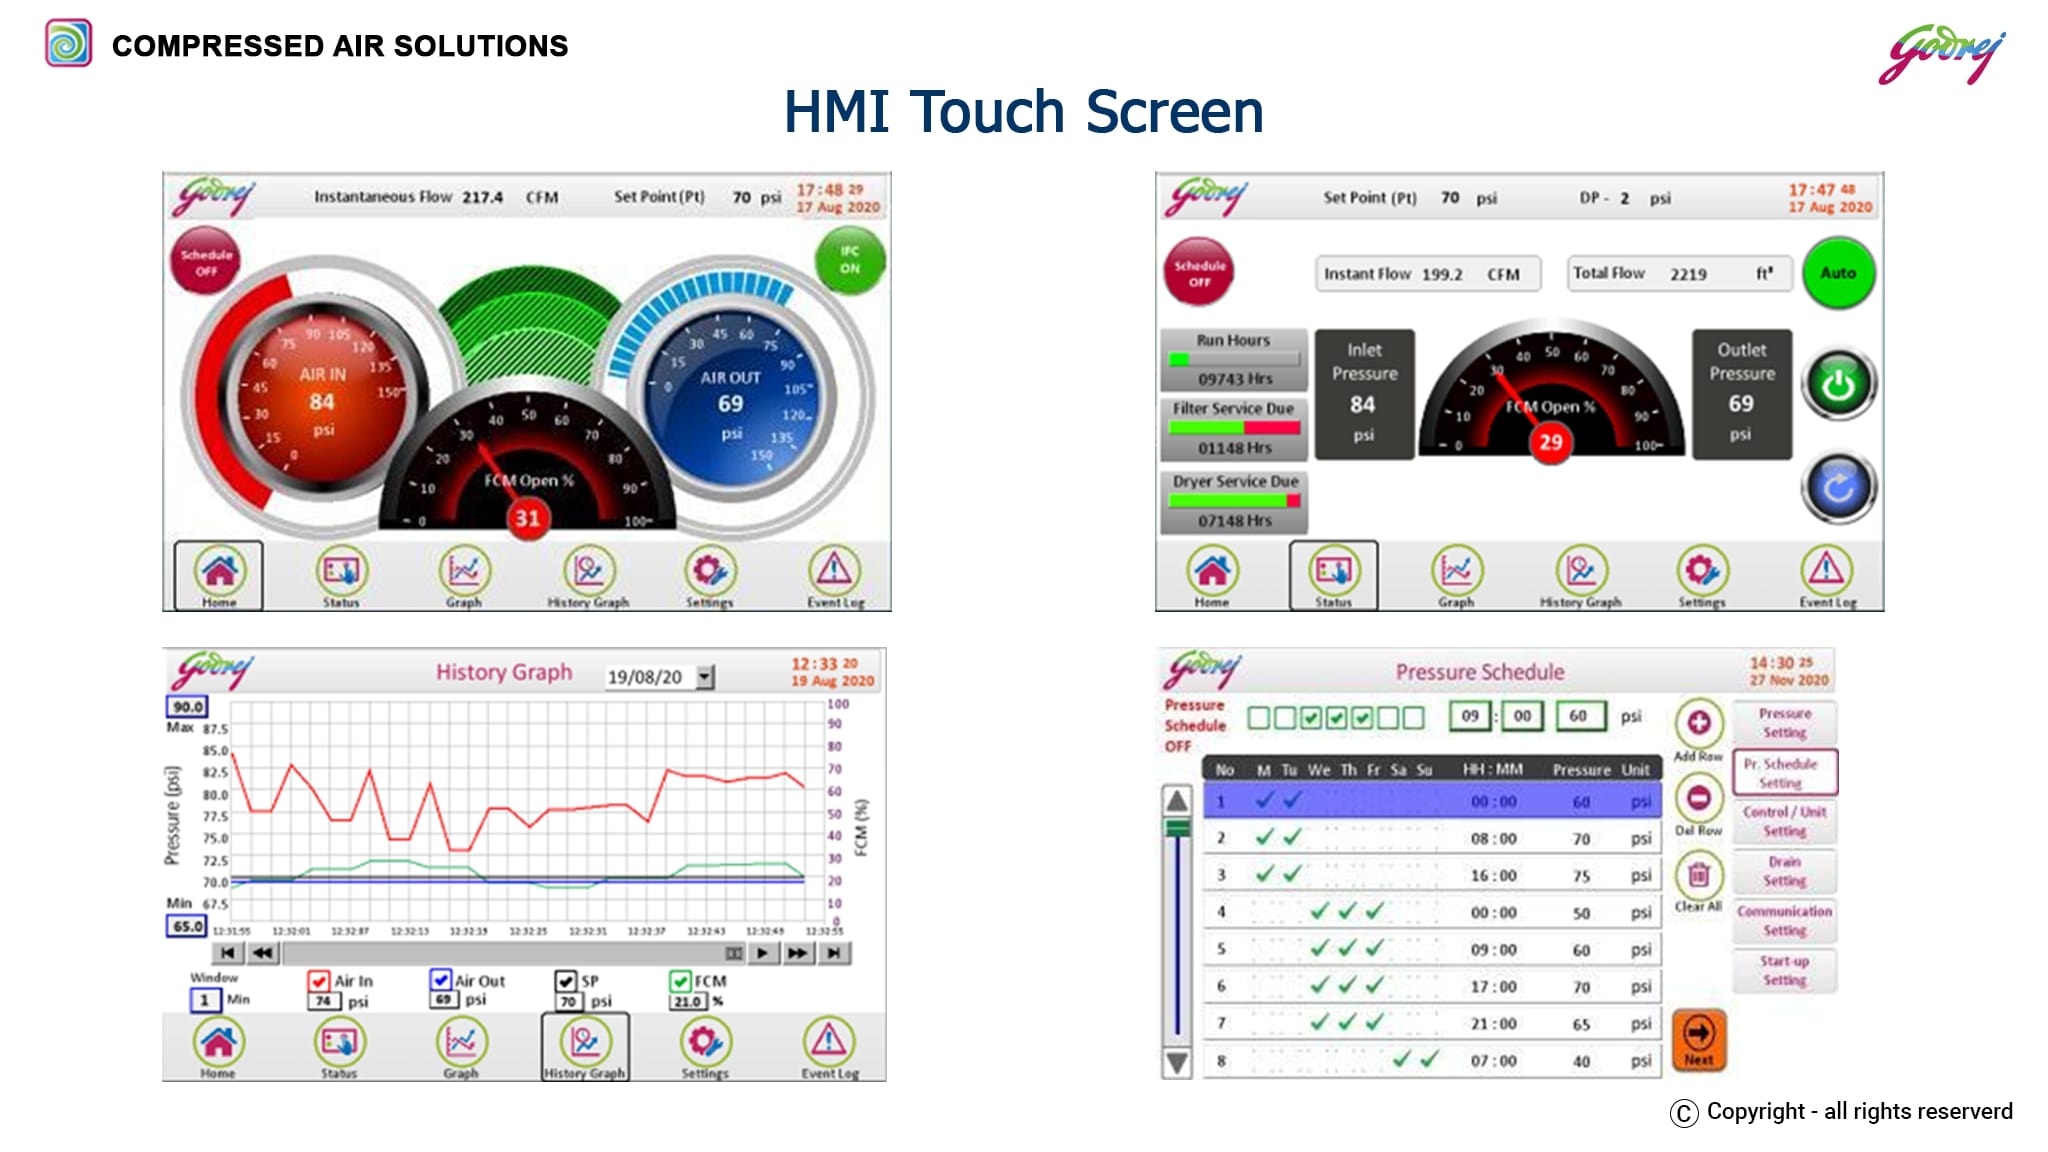 HMI Touch Screen- ENERGY SAVING SOLUTIONS IN COMPRESSED AIR NETWORK (GODREJ)